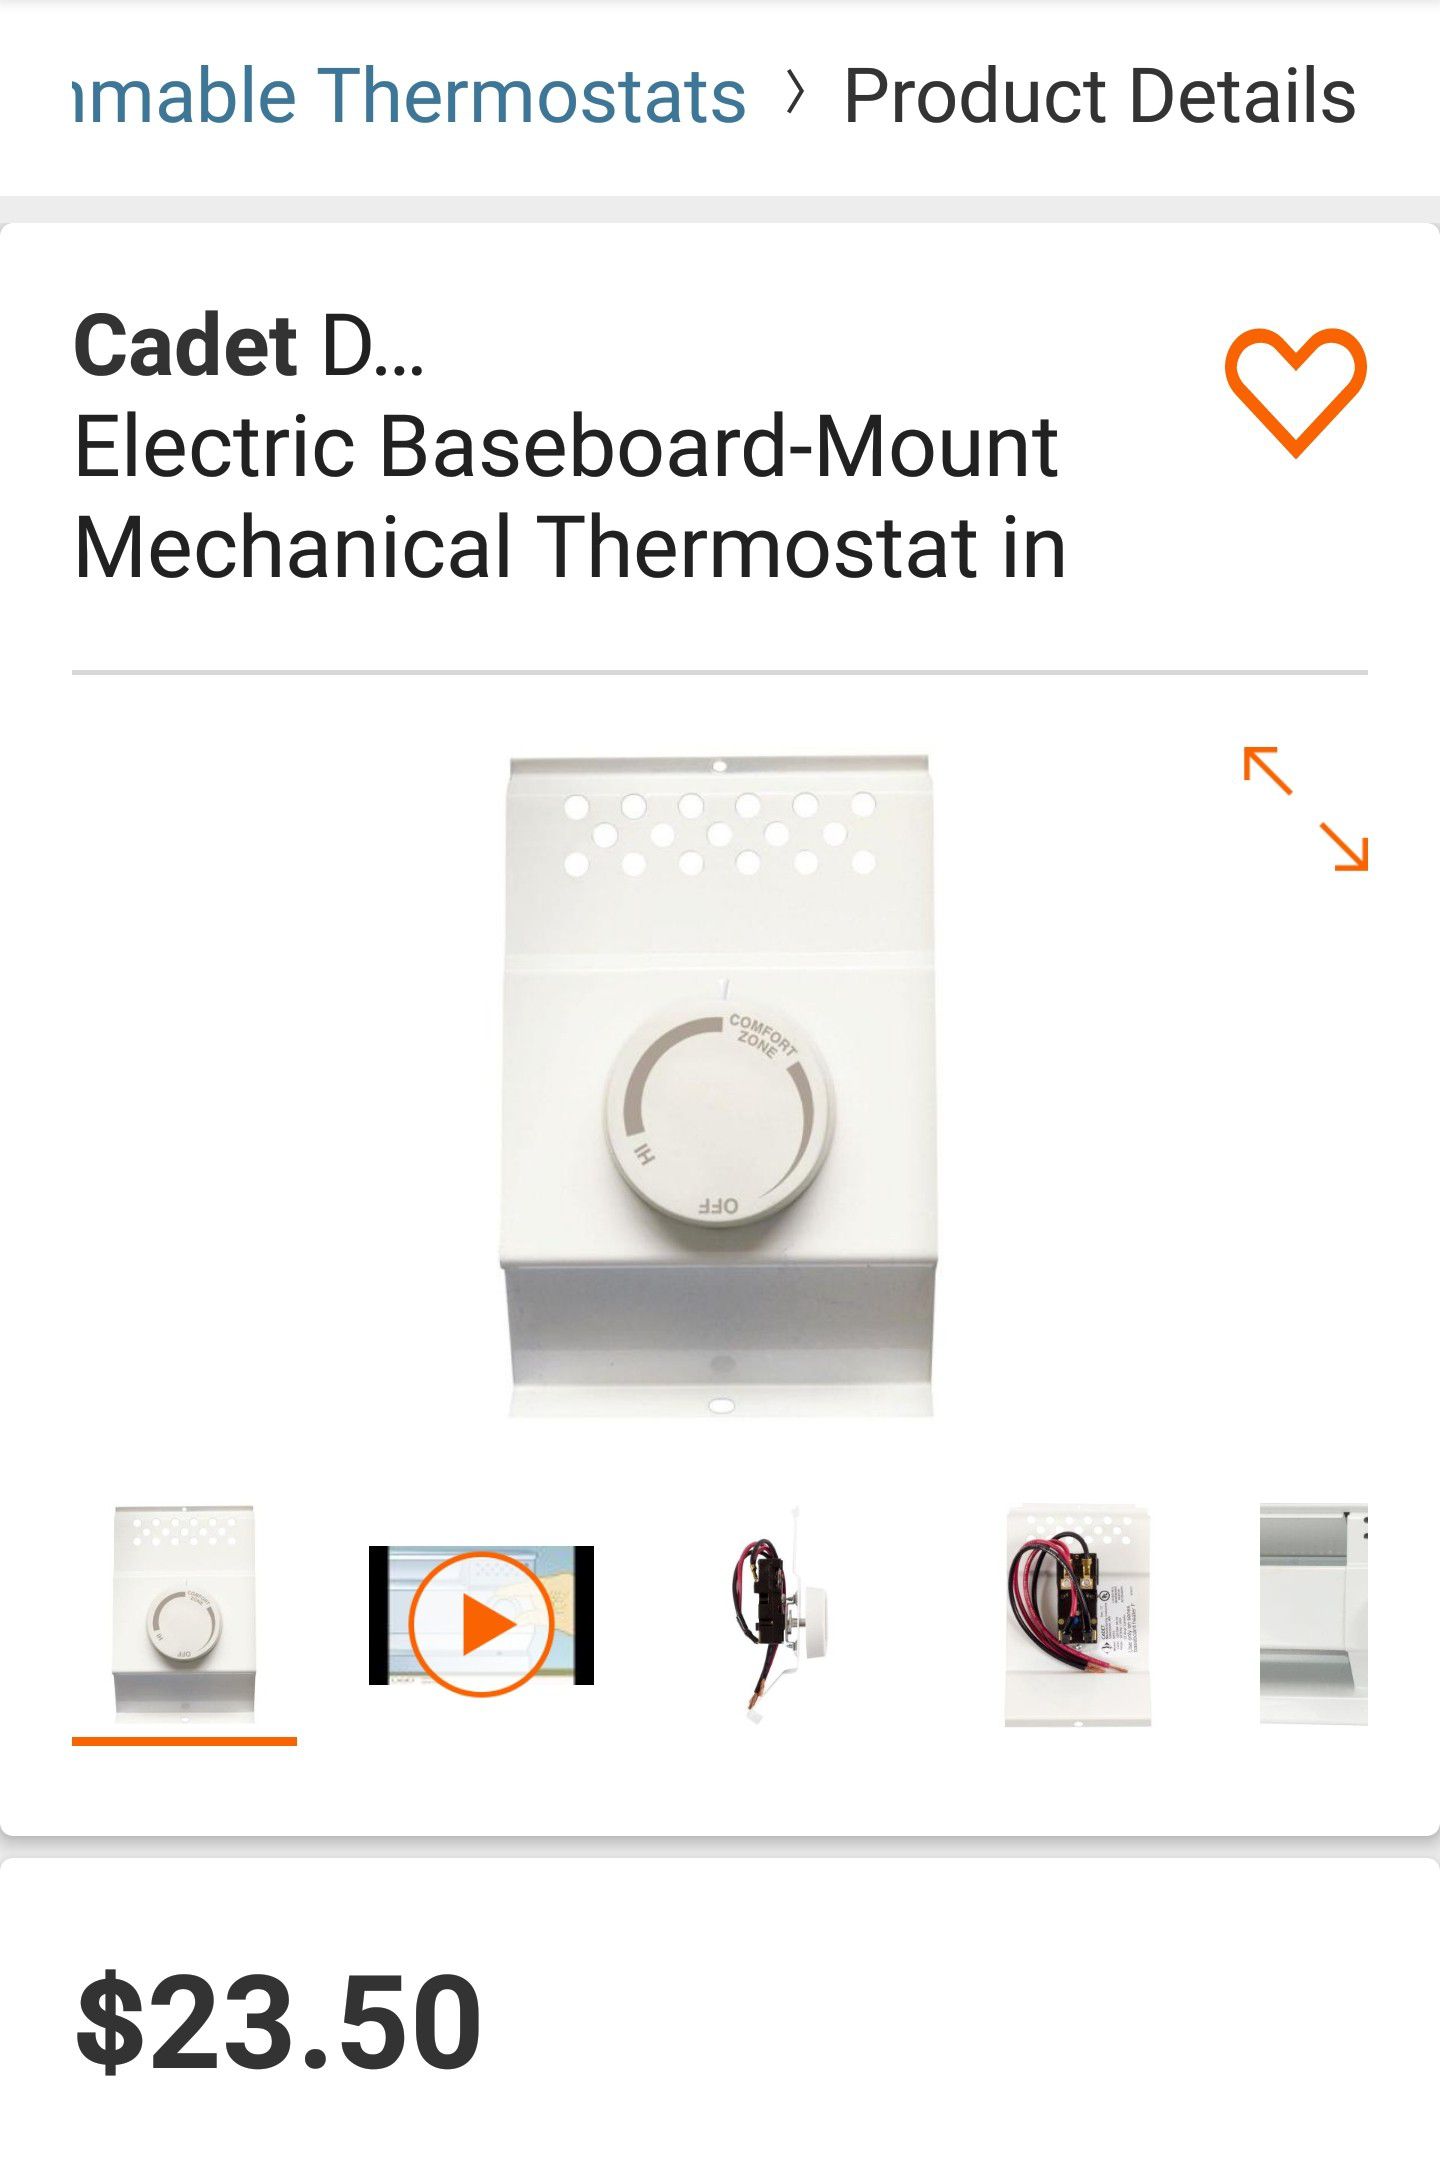 Double-Pole Electric Baseboard-Mount Mechanical Thermostat in White